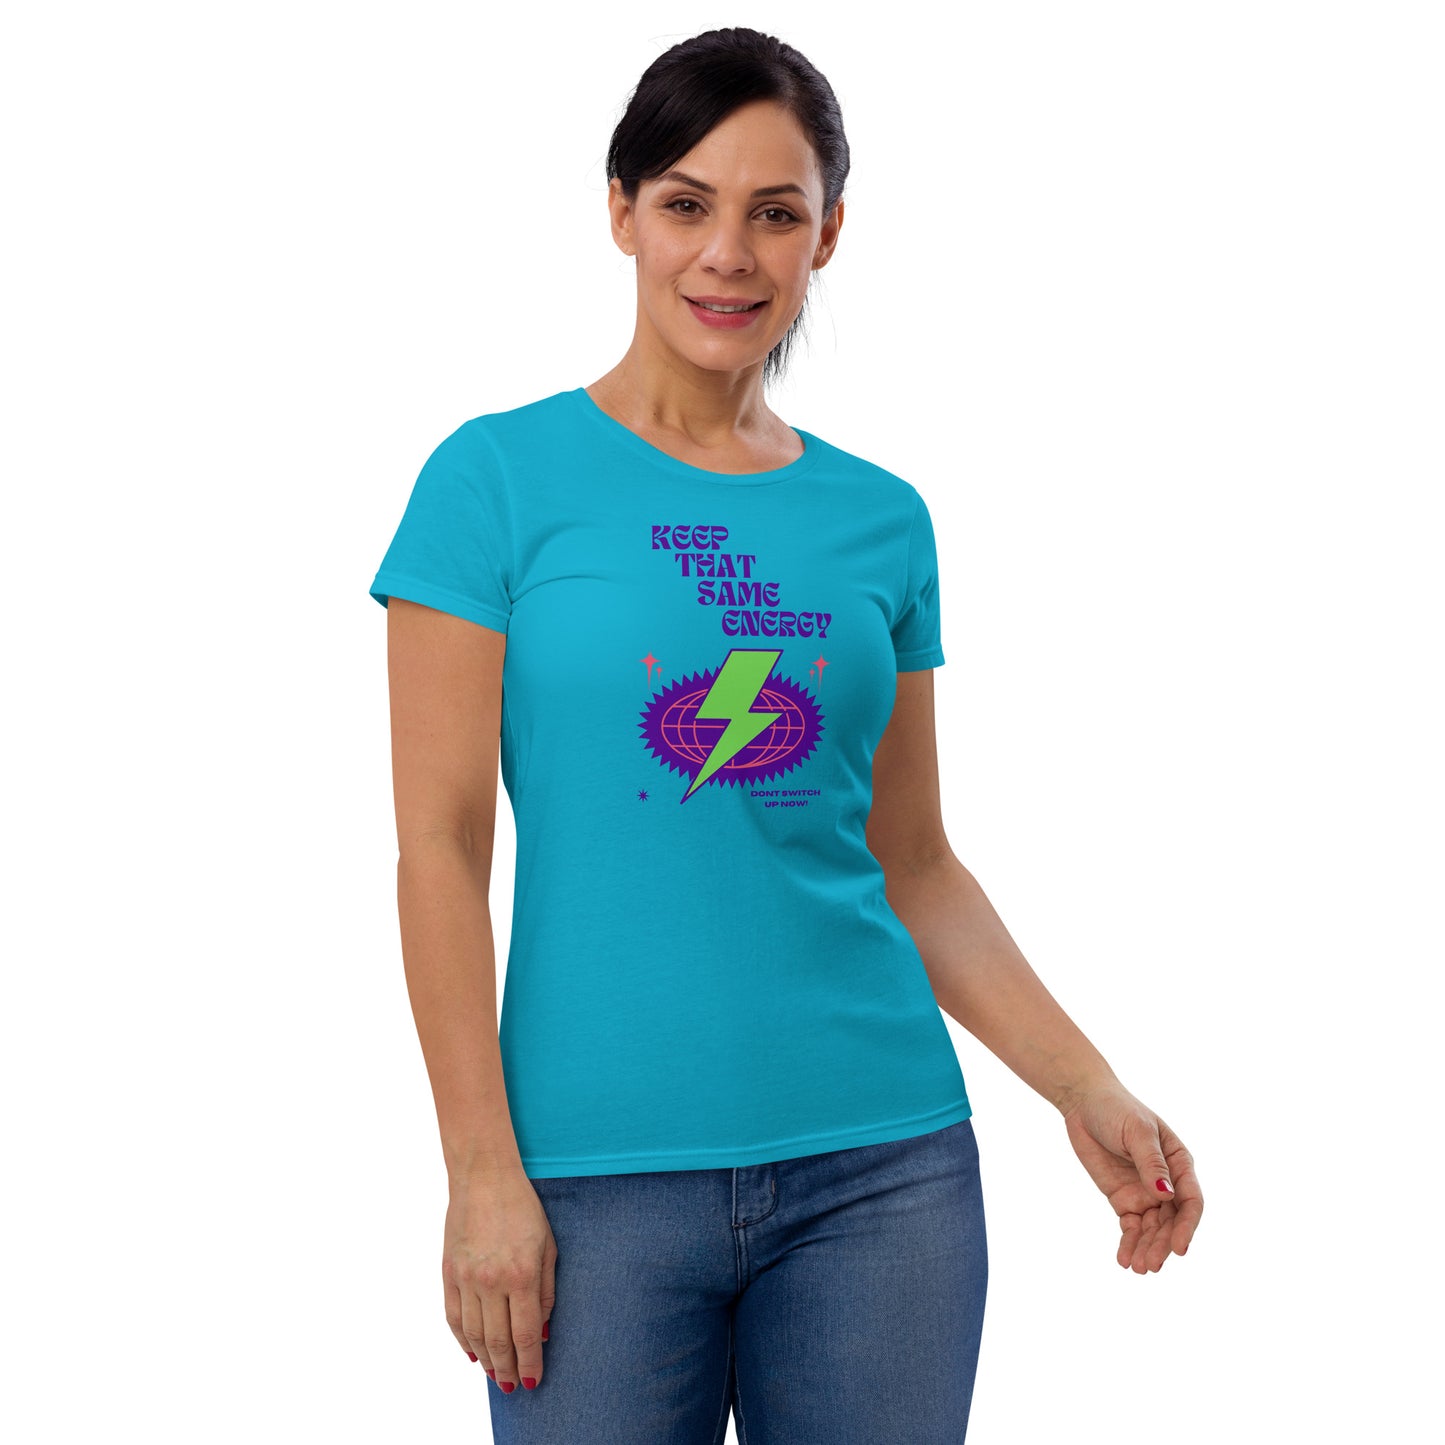 KEEP THAT SAME ENERGY - Dont Switch Up Now! Women's short sleeve t-shirt